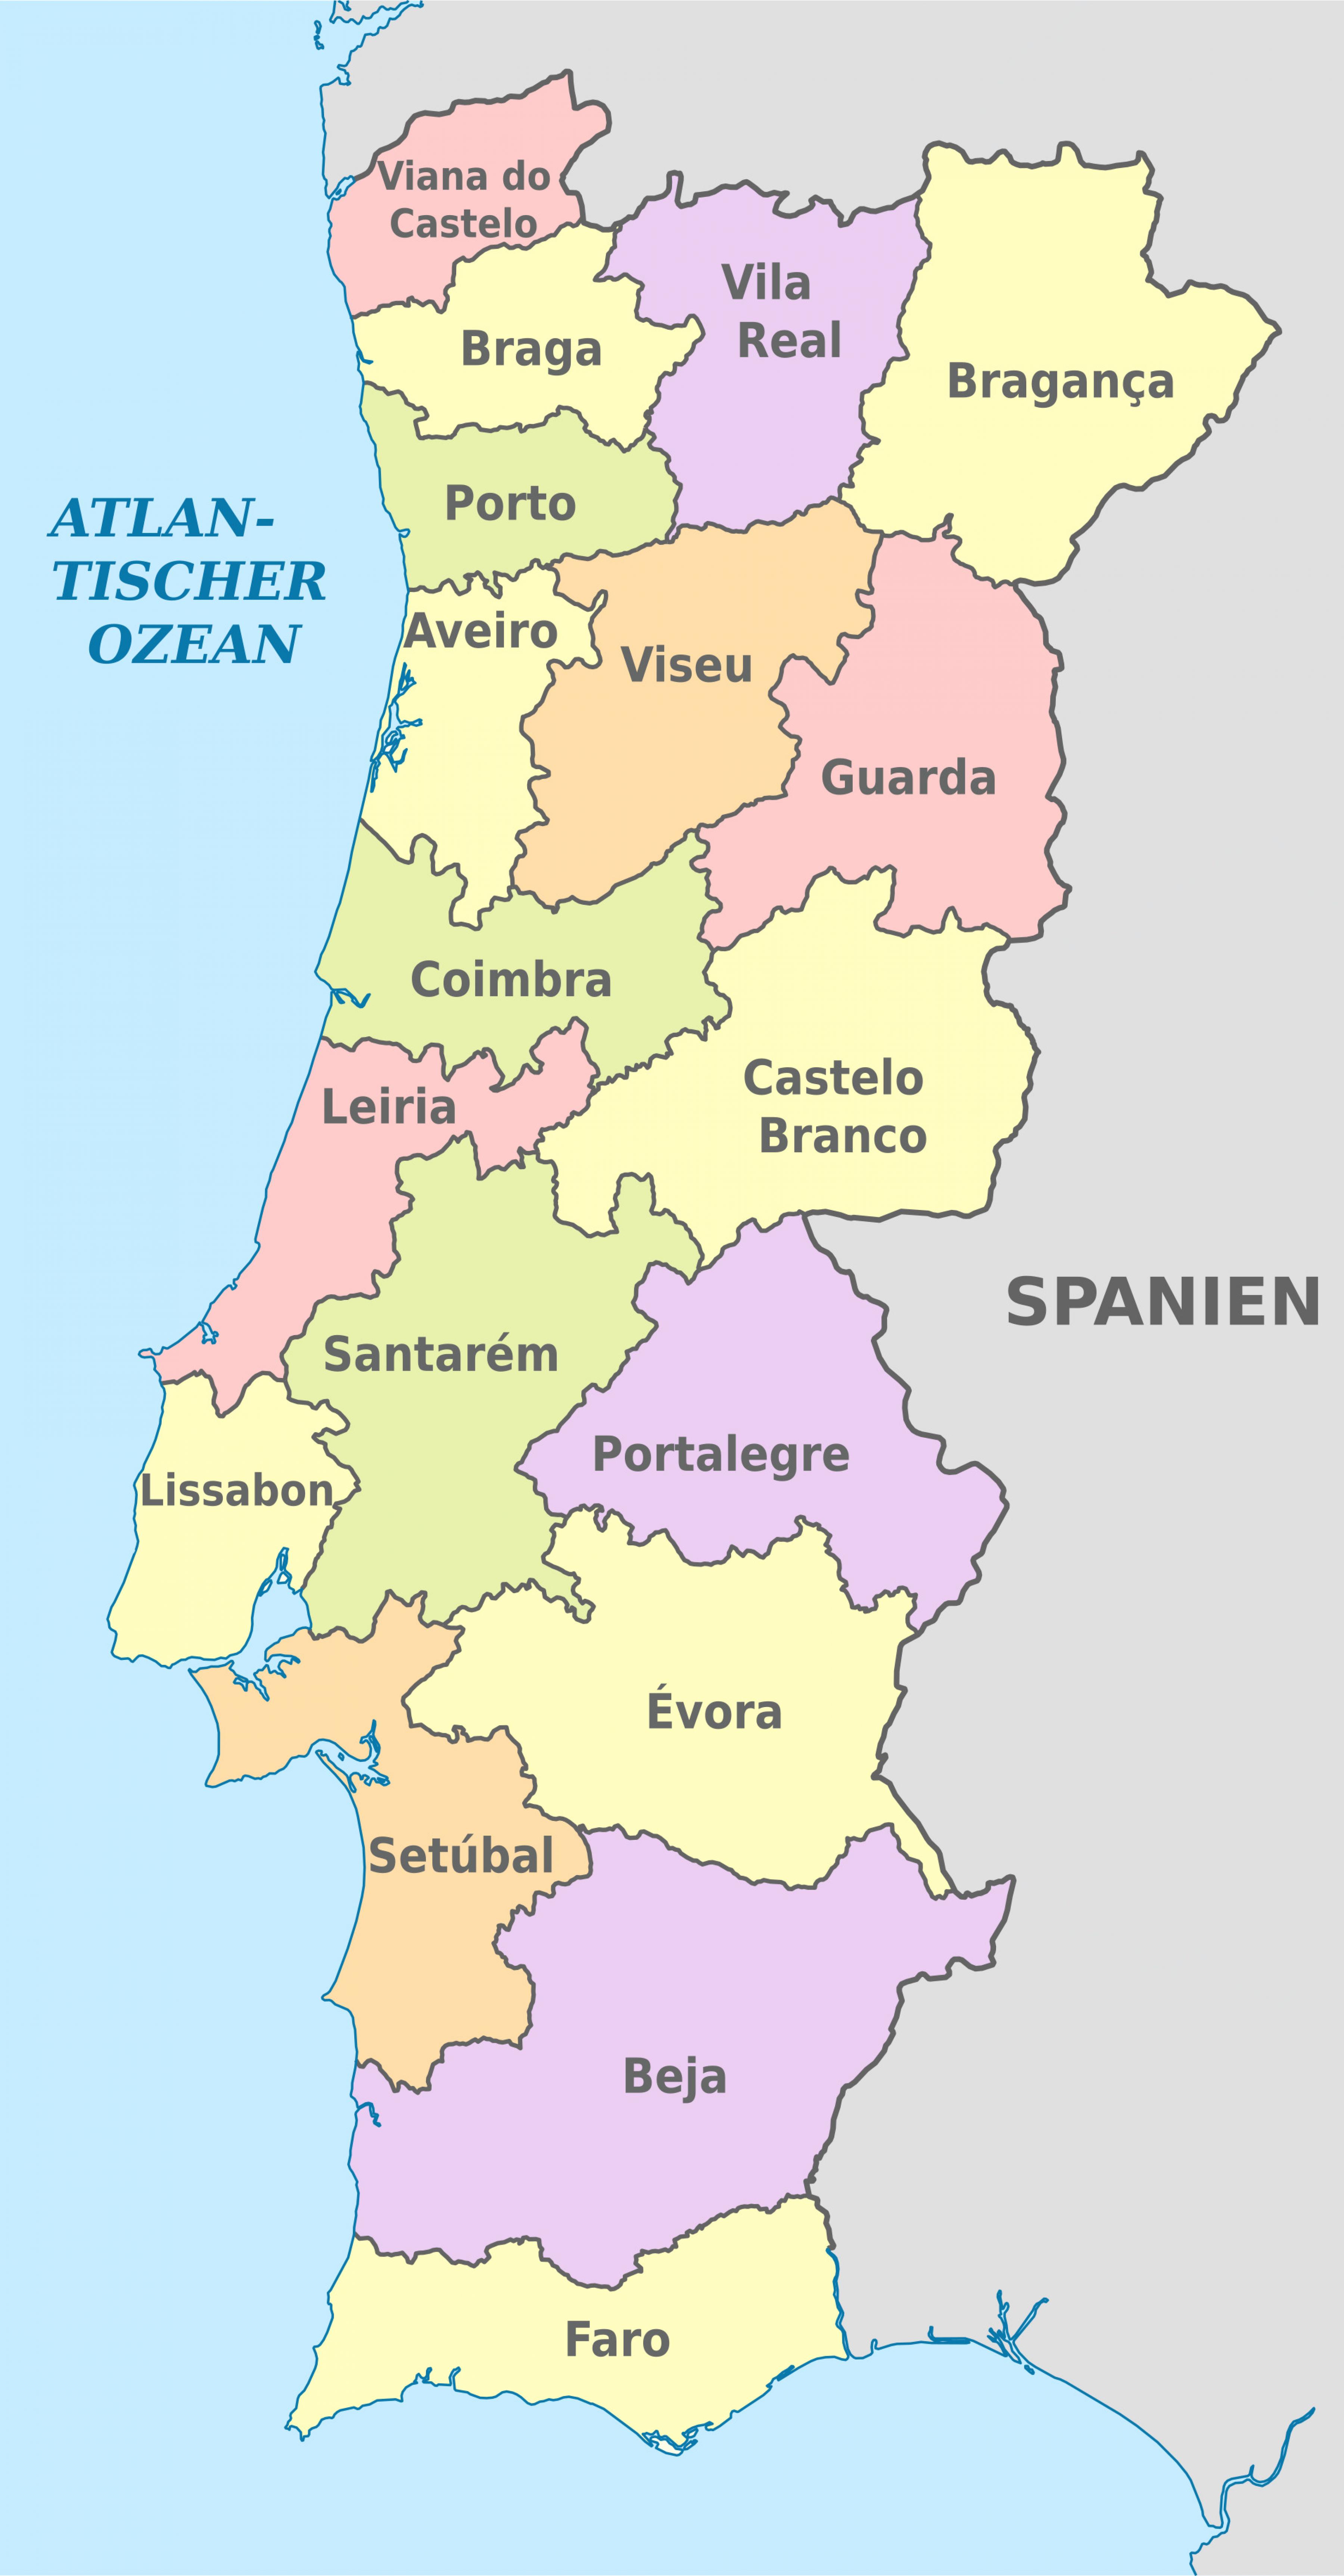 Portugal political map: southern zone